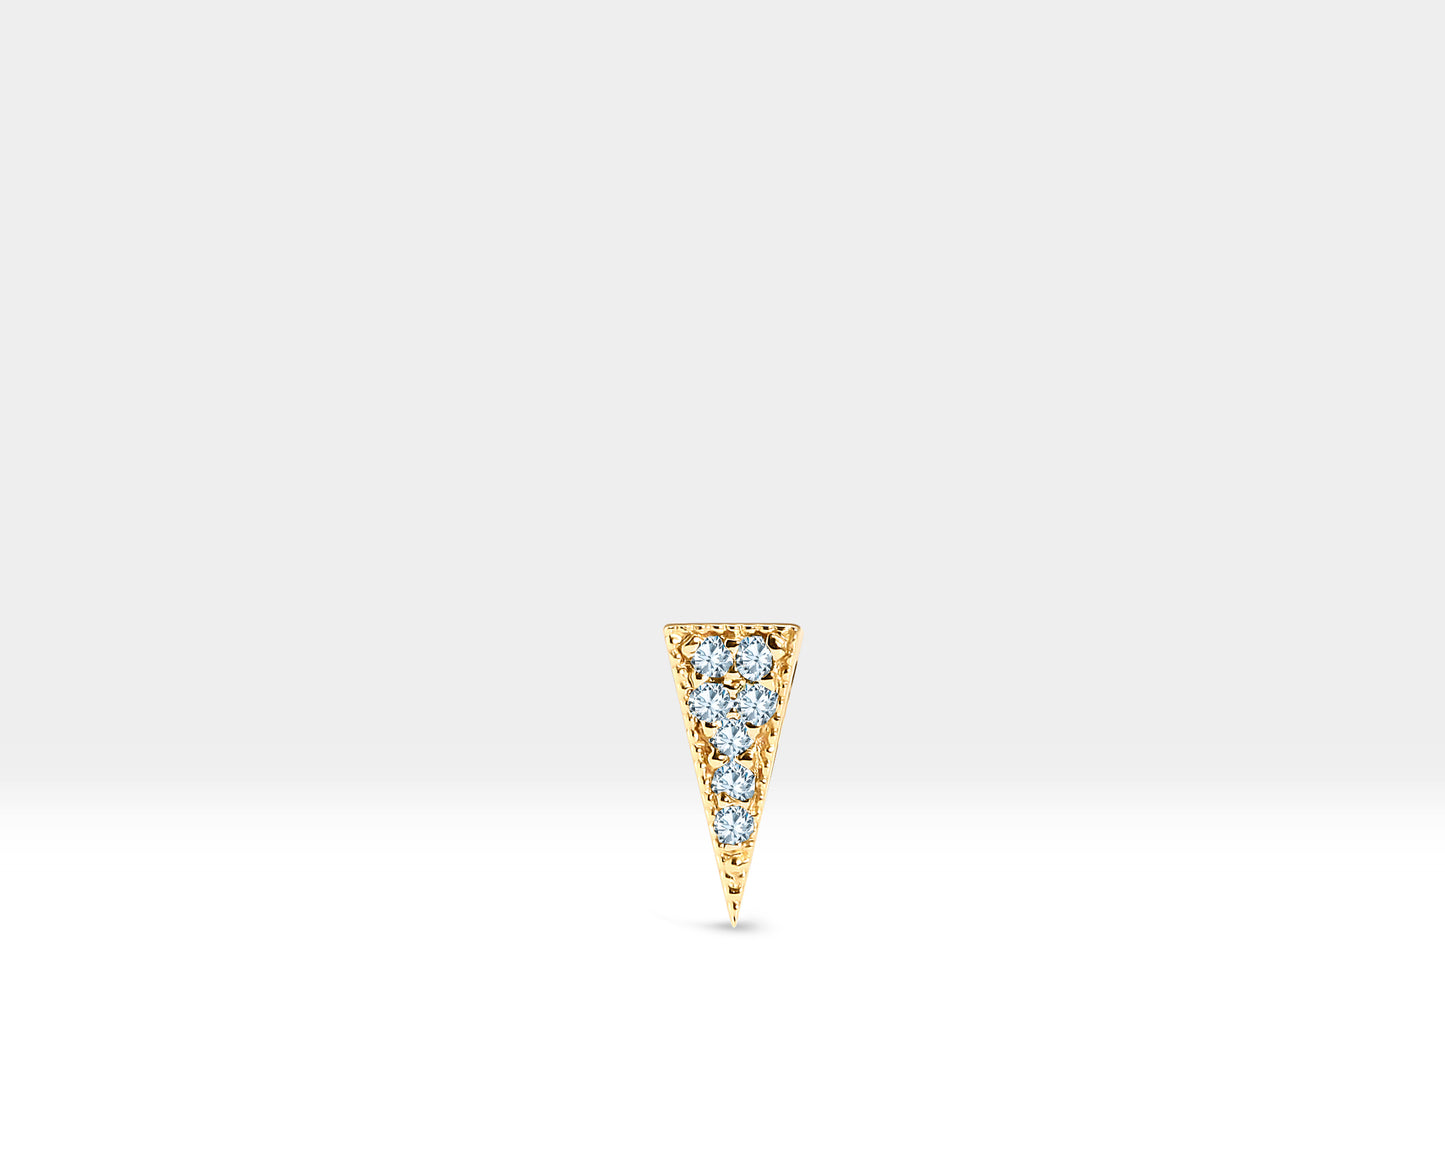 Cartilage Tragus Piercing,Pave Setting Diamond Piercing,Triangle Design Piercing,14K Yellow Solid Gold